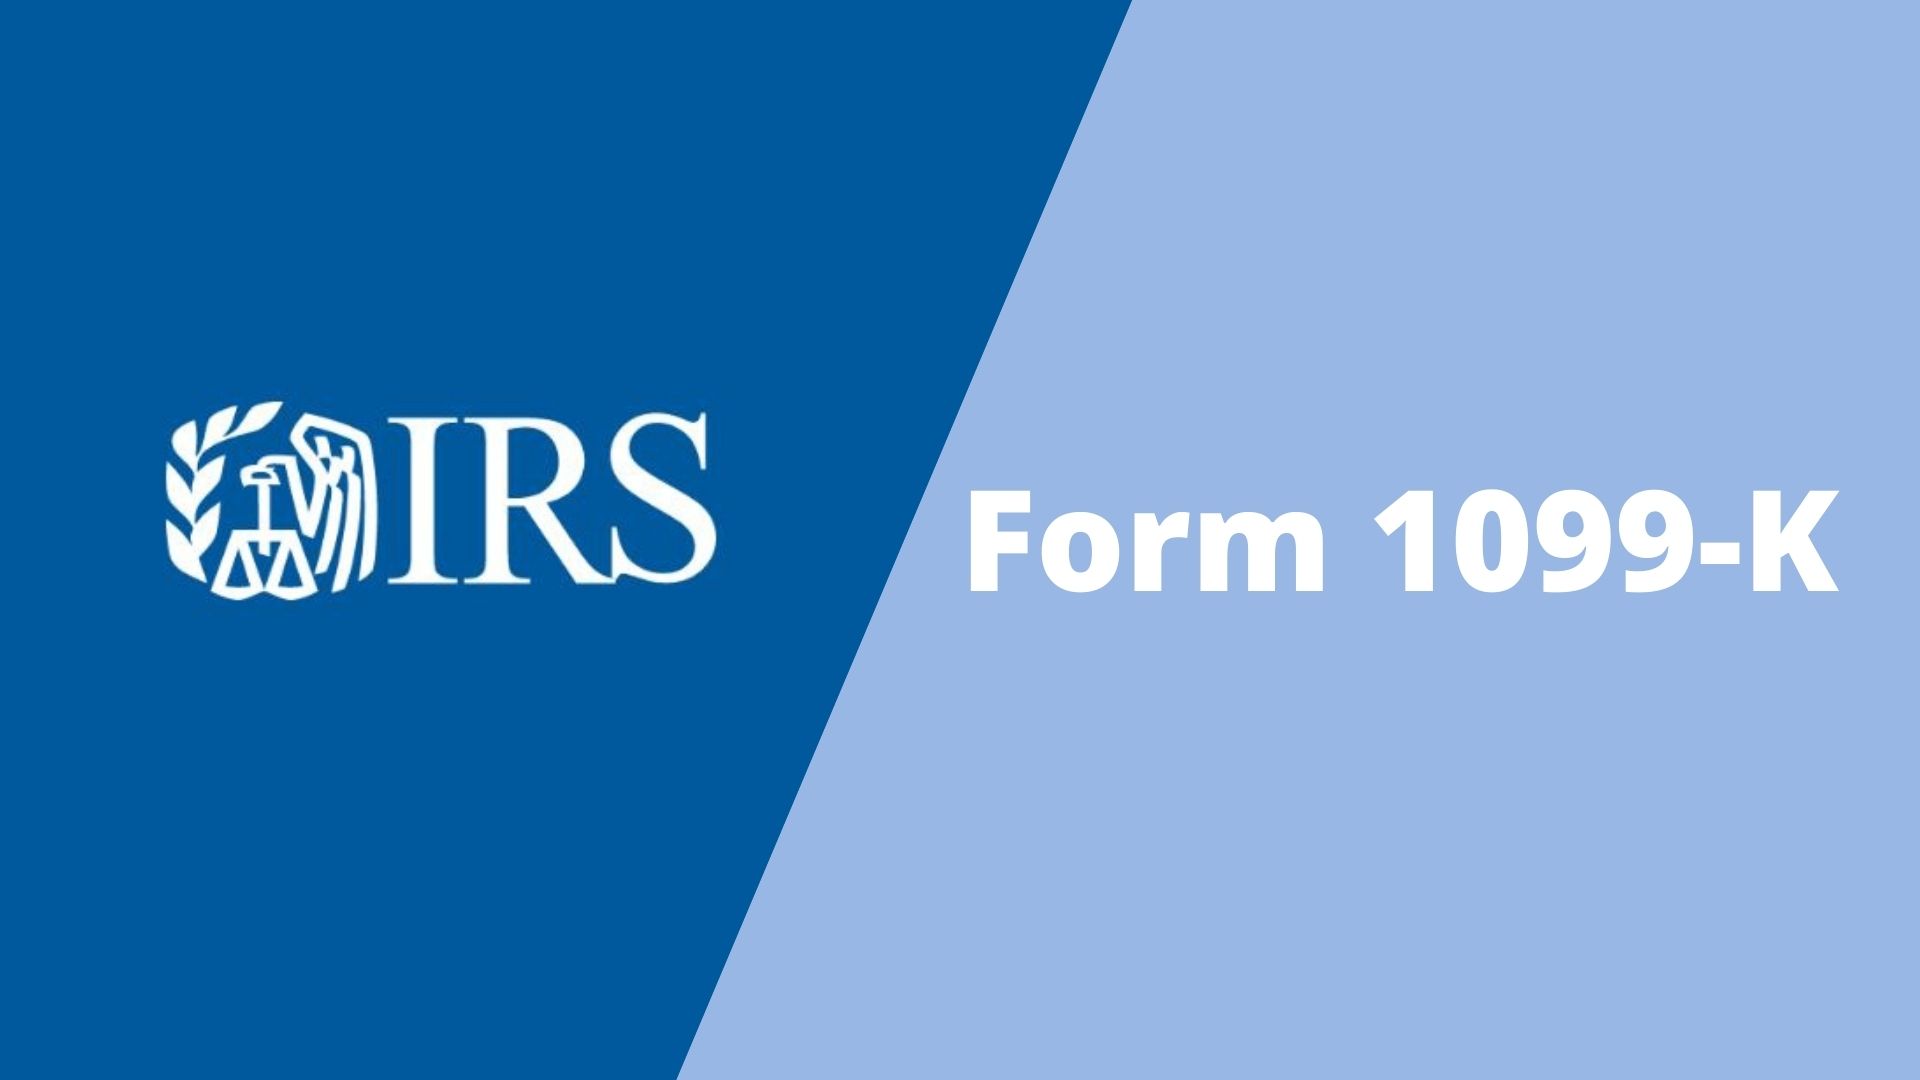 PayPal to issue Form 1099-K to freelancers